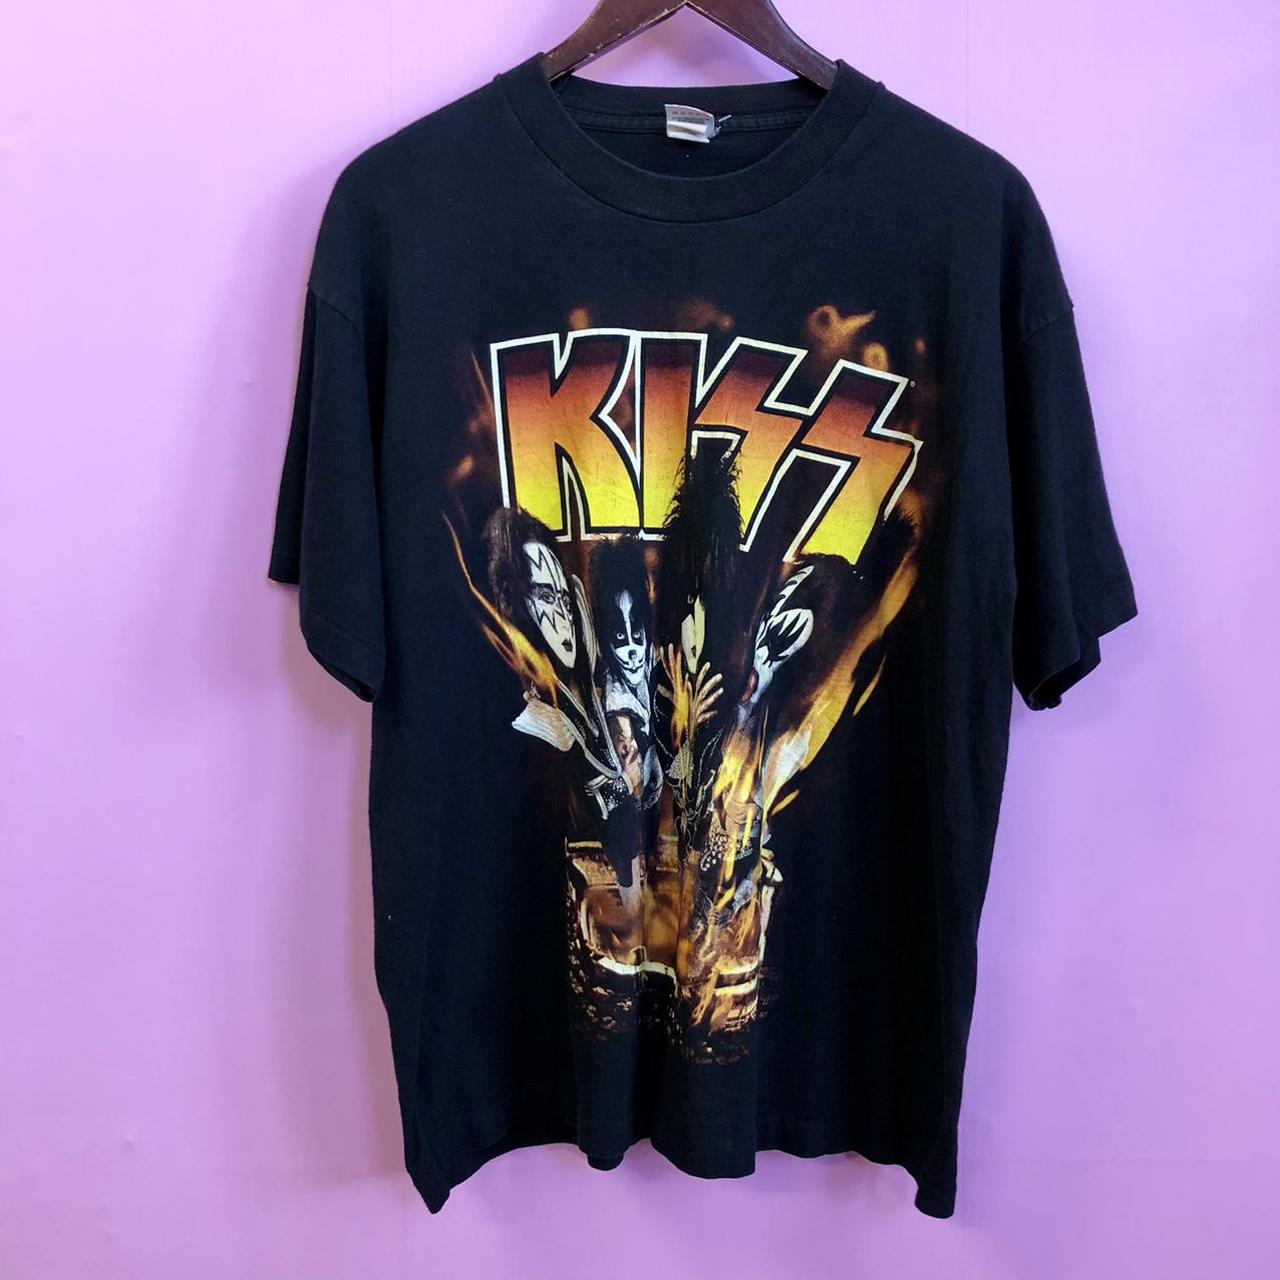 Product Image 1 - Sold as seen 

Vintage KISS